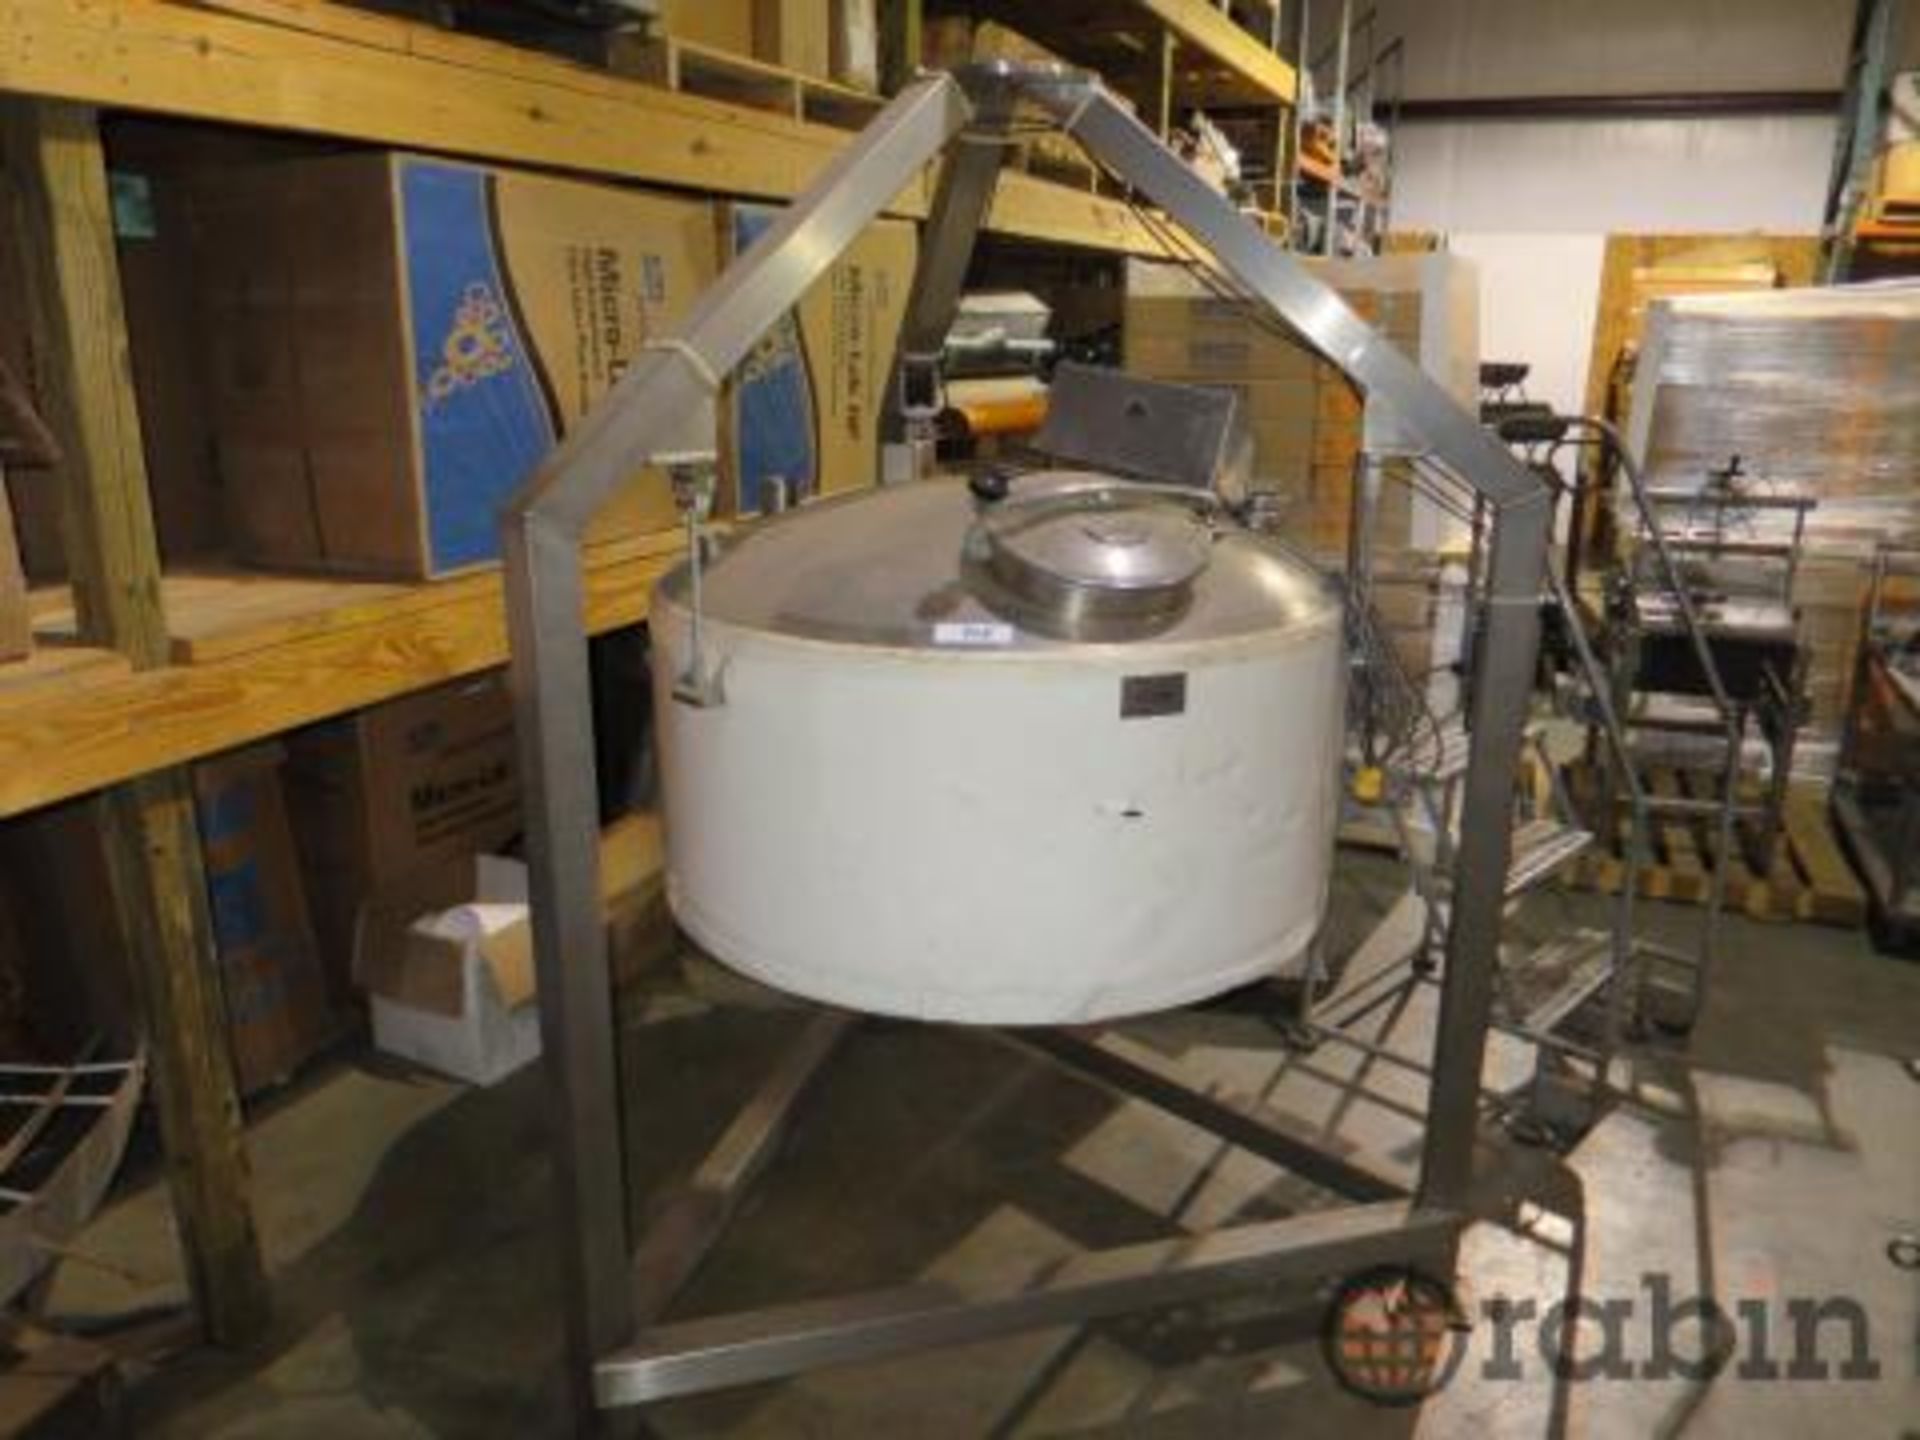 Scale tank, stainless, 56" dia x 21" on st. wl., with Hardy Instruments Waversaver readout [